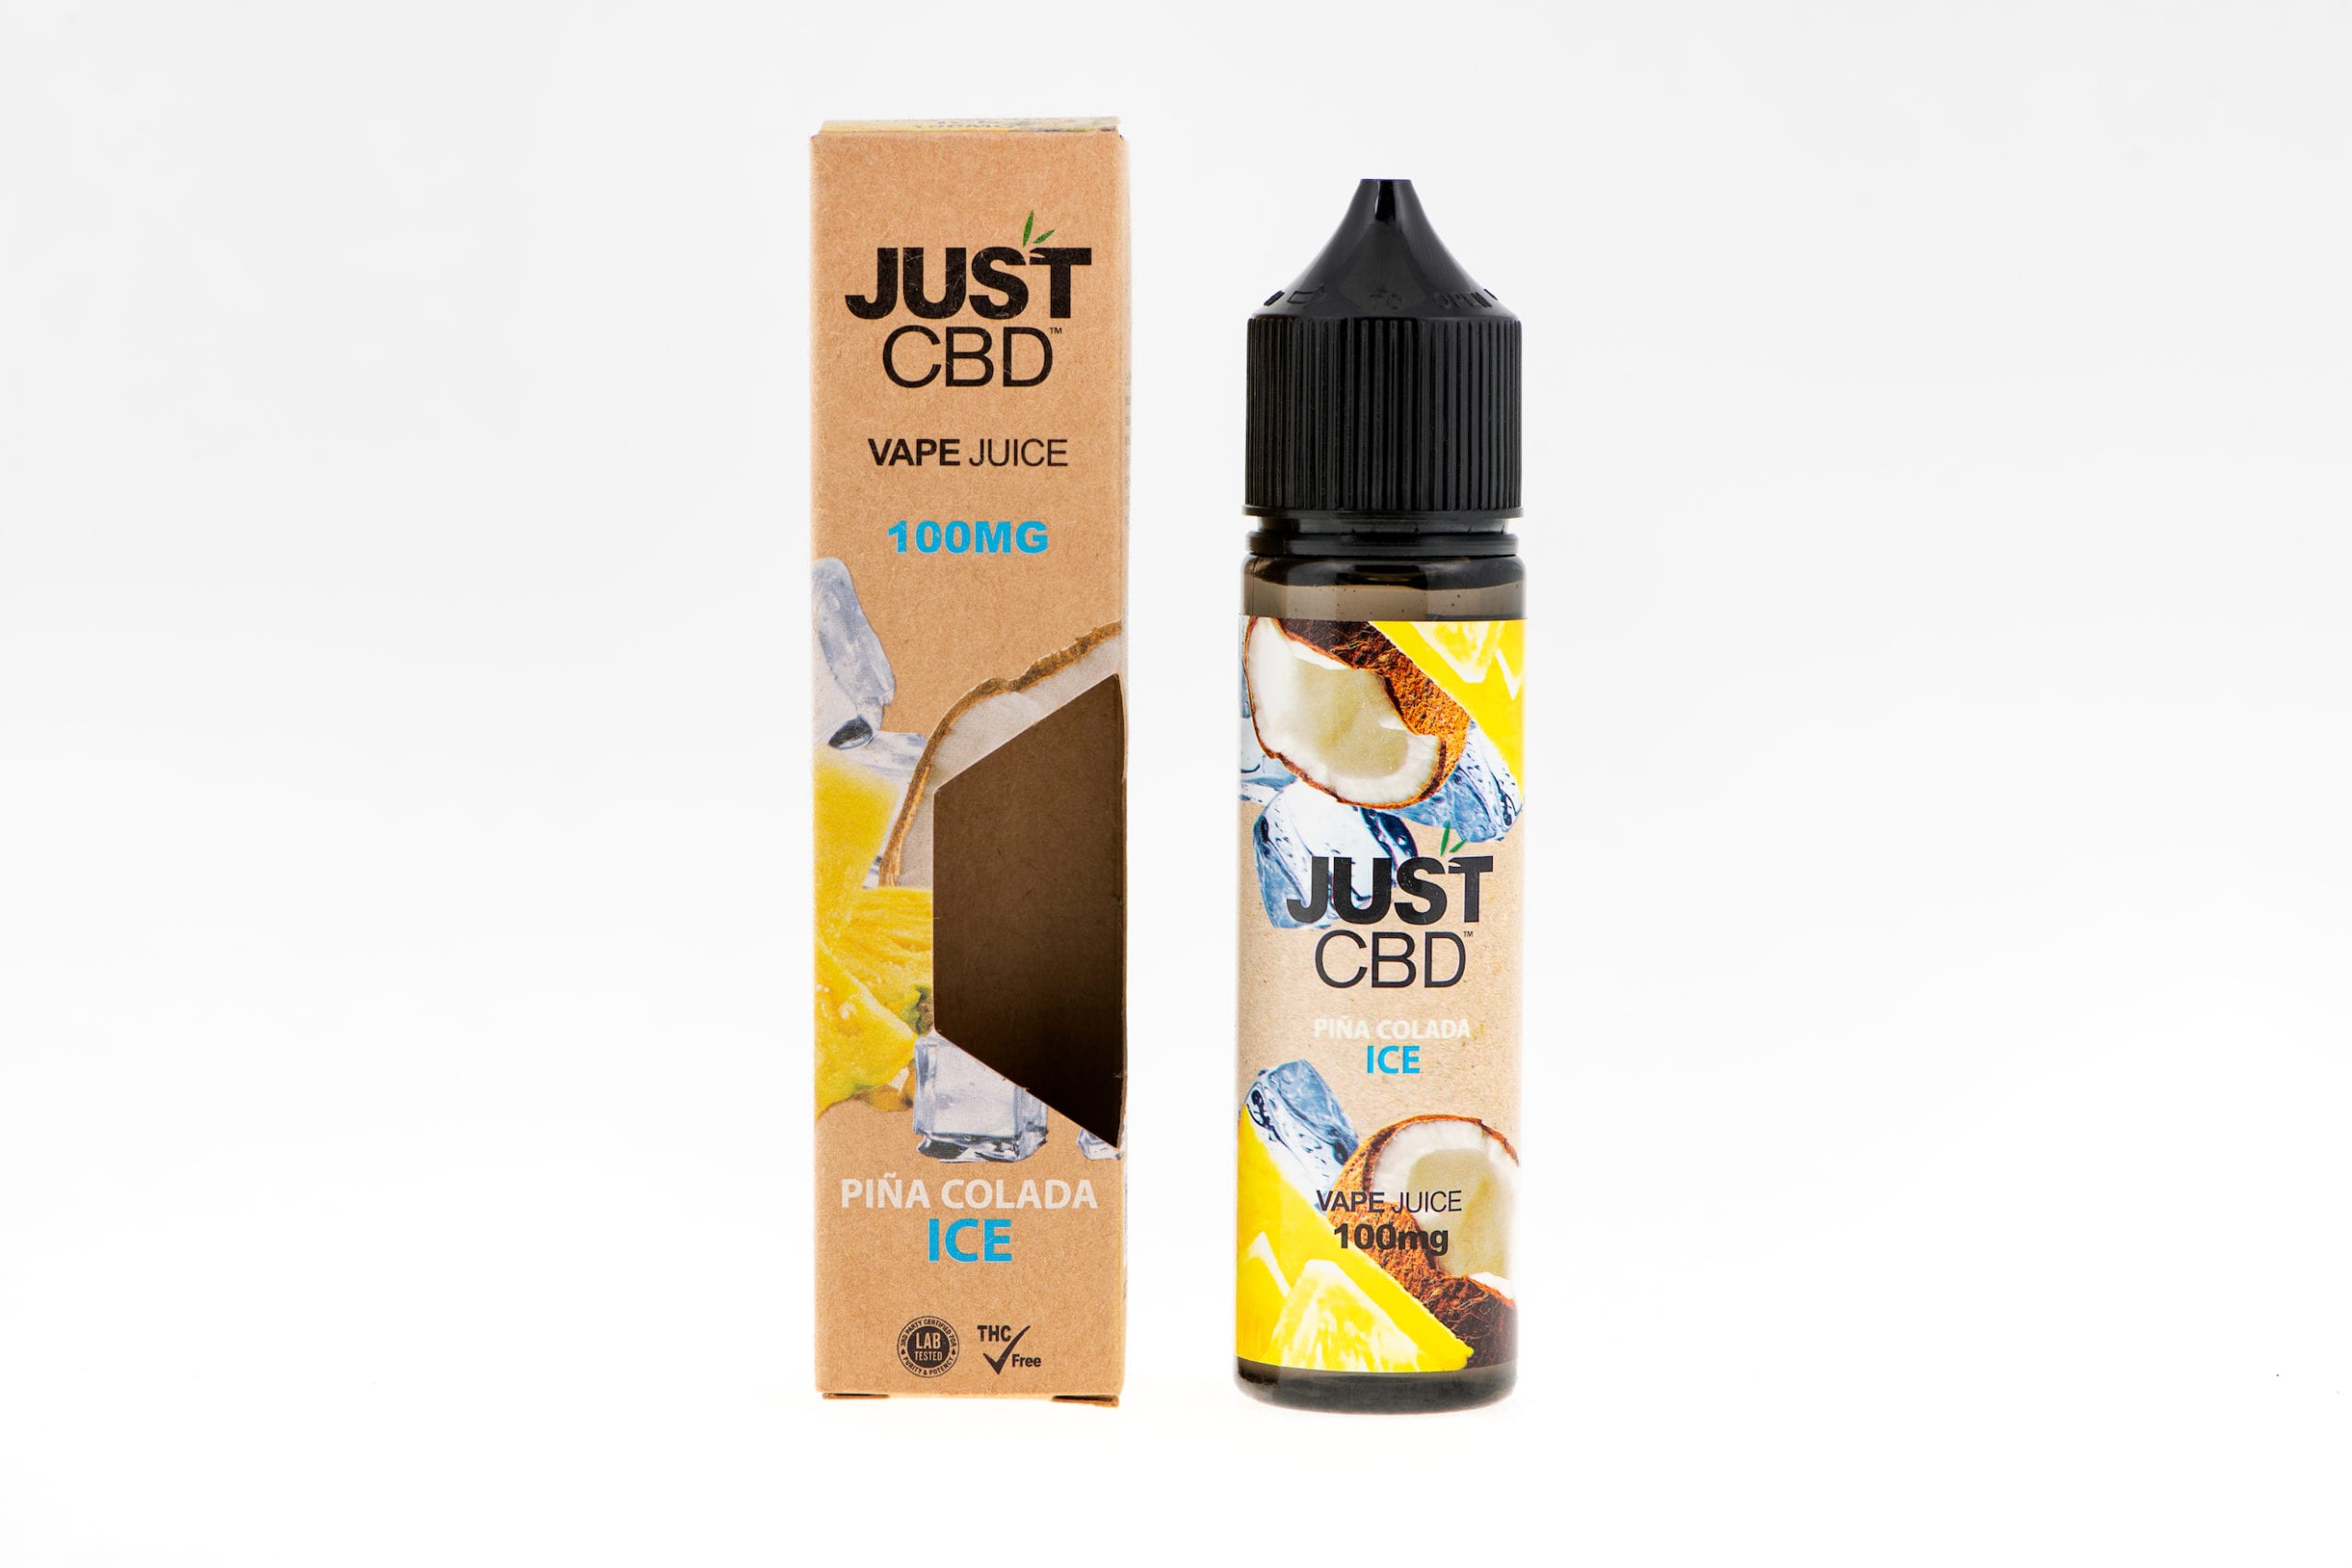 IU C&I Studios Portfolio JustCBD Product Photography and Just CBD Products JUSTCBD Pina Colada ICE Vape Juice container and package on display